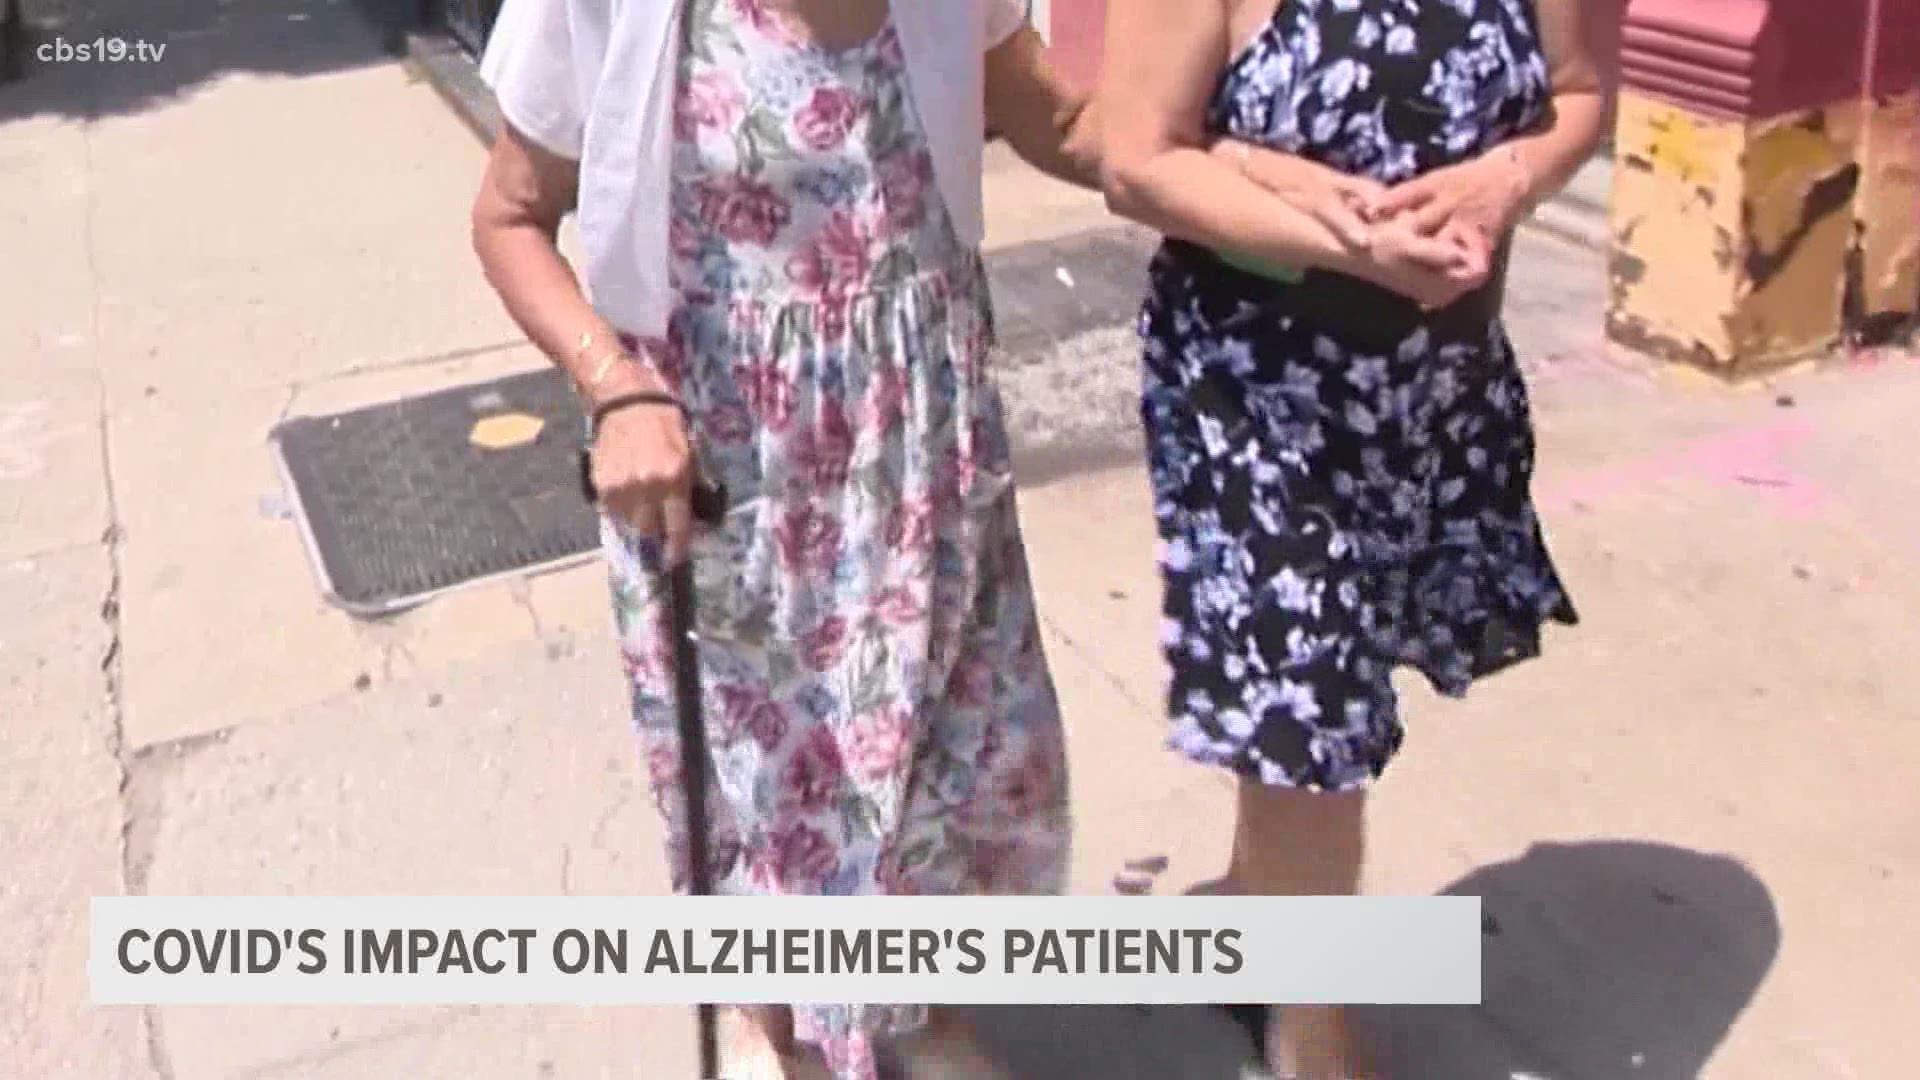 The Alzheimer's Alliance of Smith County says their clients are having a hard time during the pandemic.